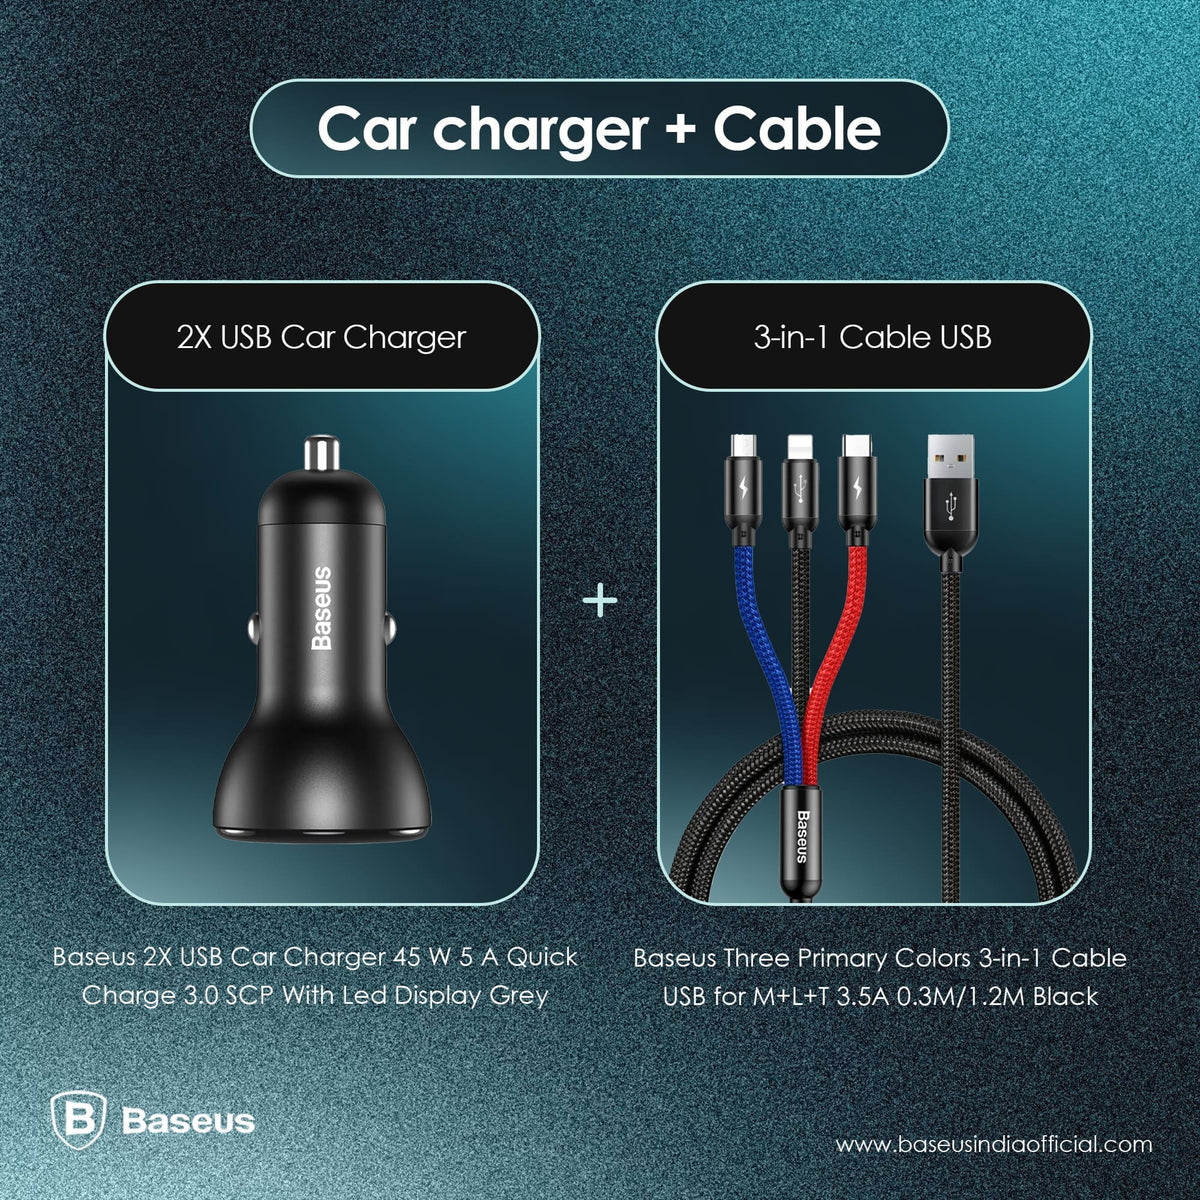 Baseus 2X USB Car Charger 45 W + 3-in-1 USB Cable (CCBX-B0G-1)